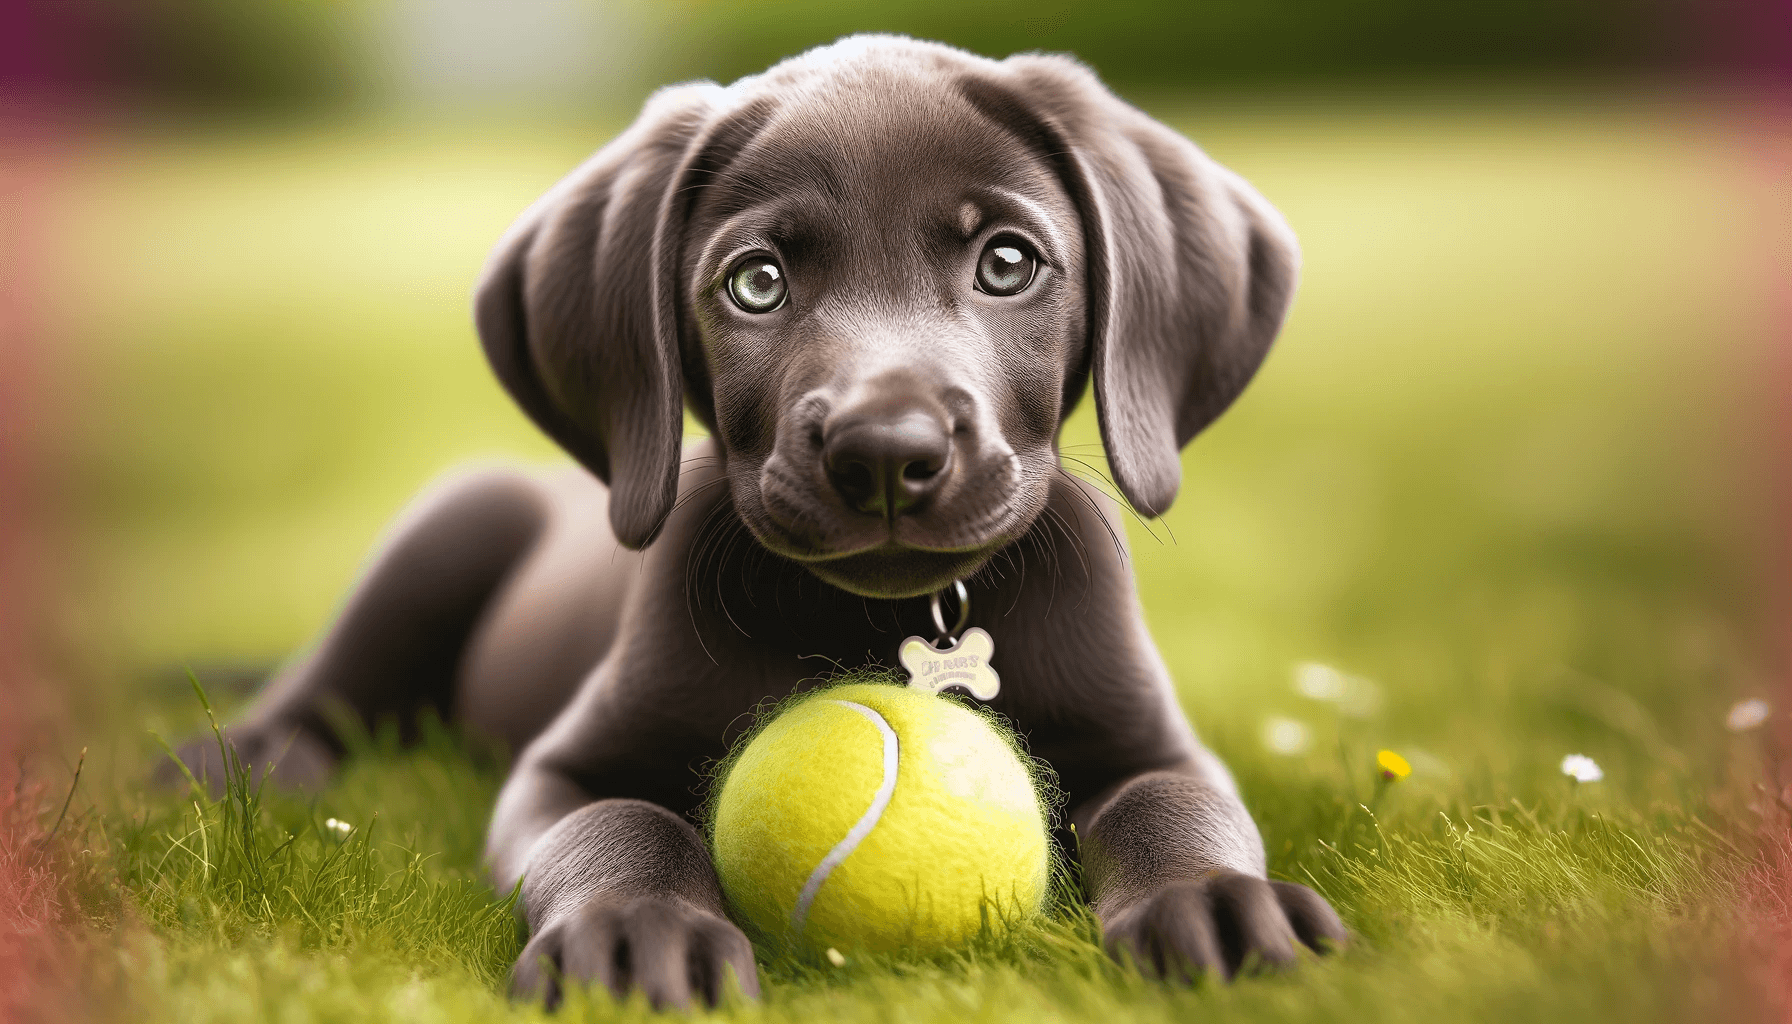 Weimaraner Lab mix puppy lying on a grassy field, holding a bright yellow tennis ball in its mouth. The puppy has a soft, fluffy black coat and a big, curious expression.